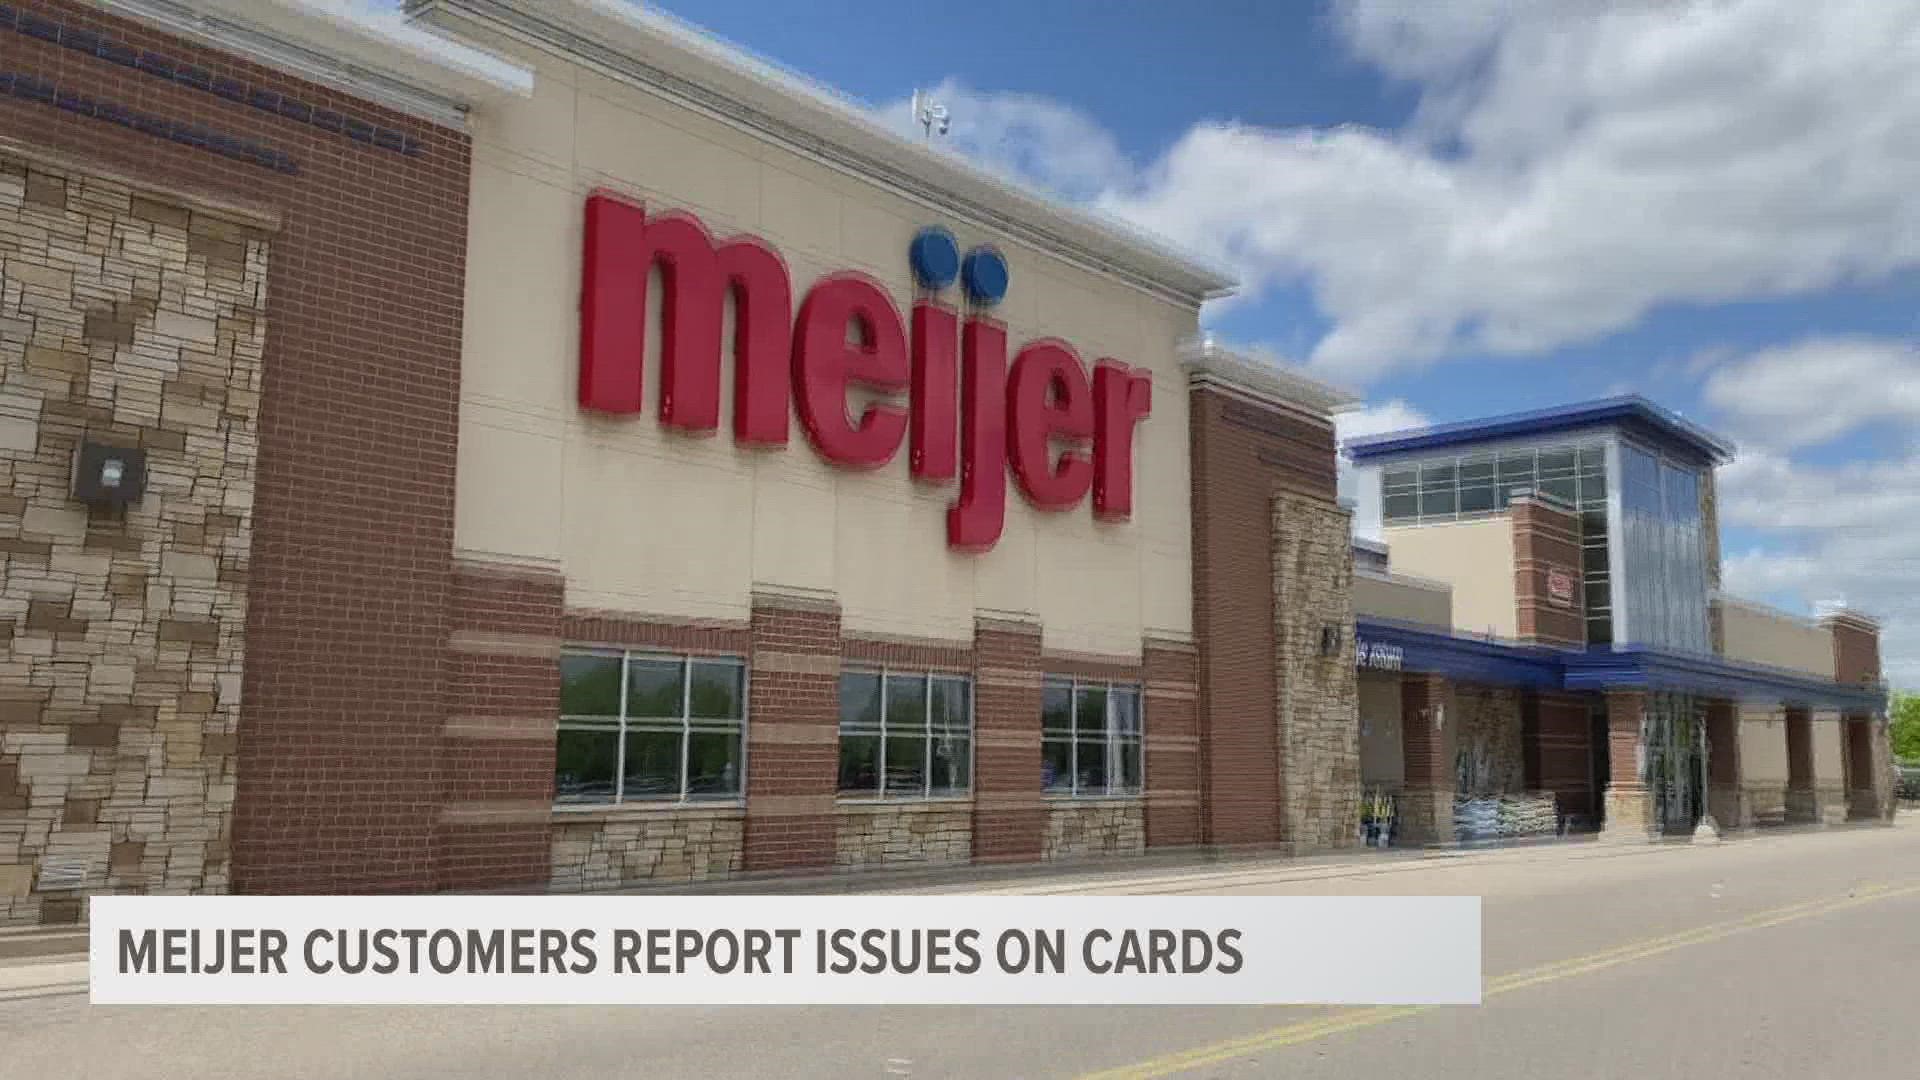 Some customers said they experienced long wait times while at Meijer stores over the weekend and learned their cards had been charged multiple times.